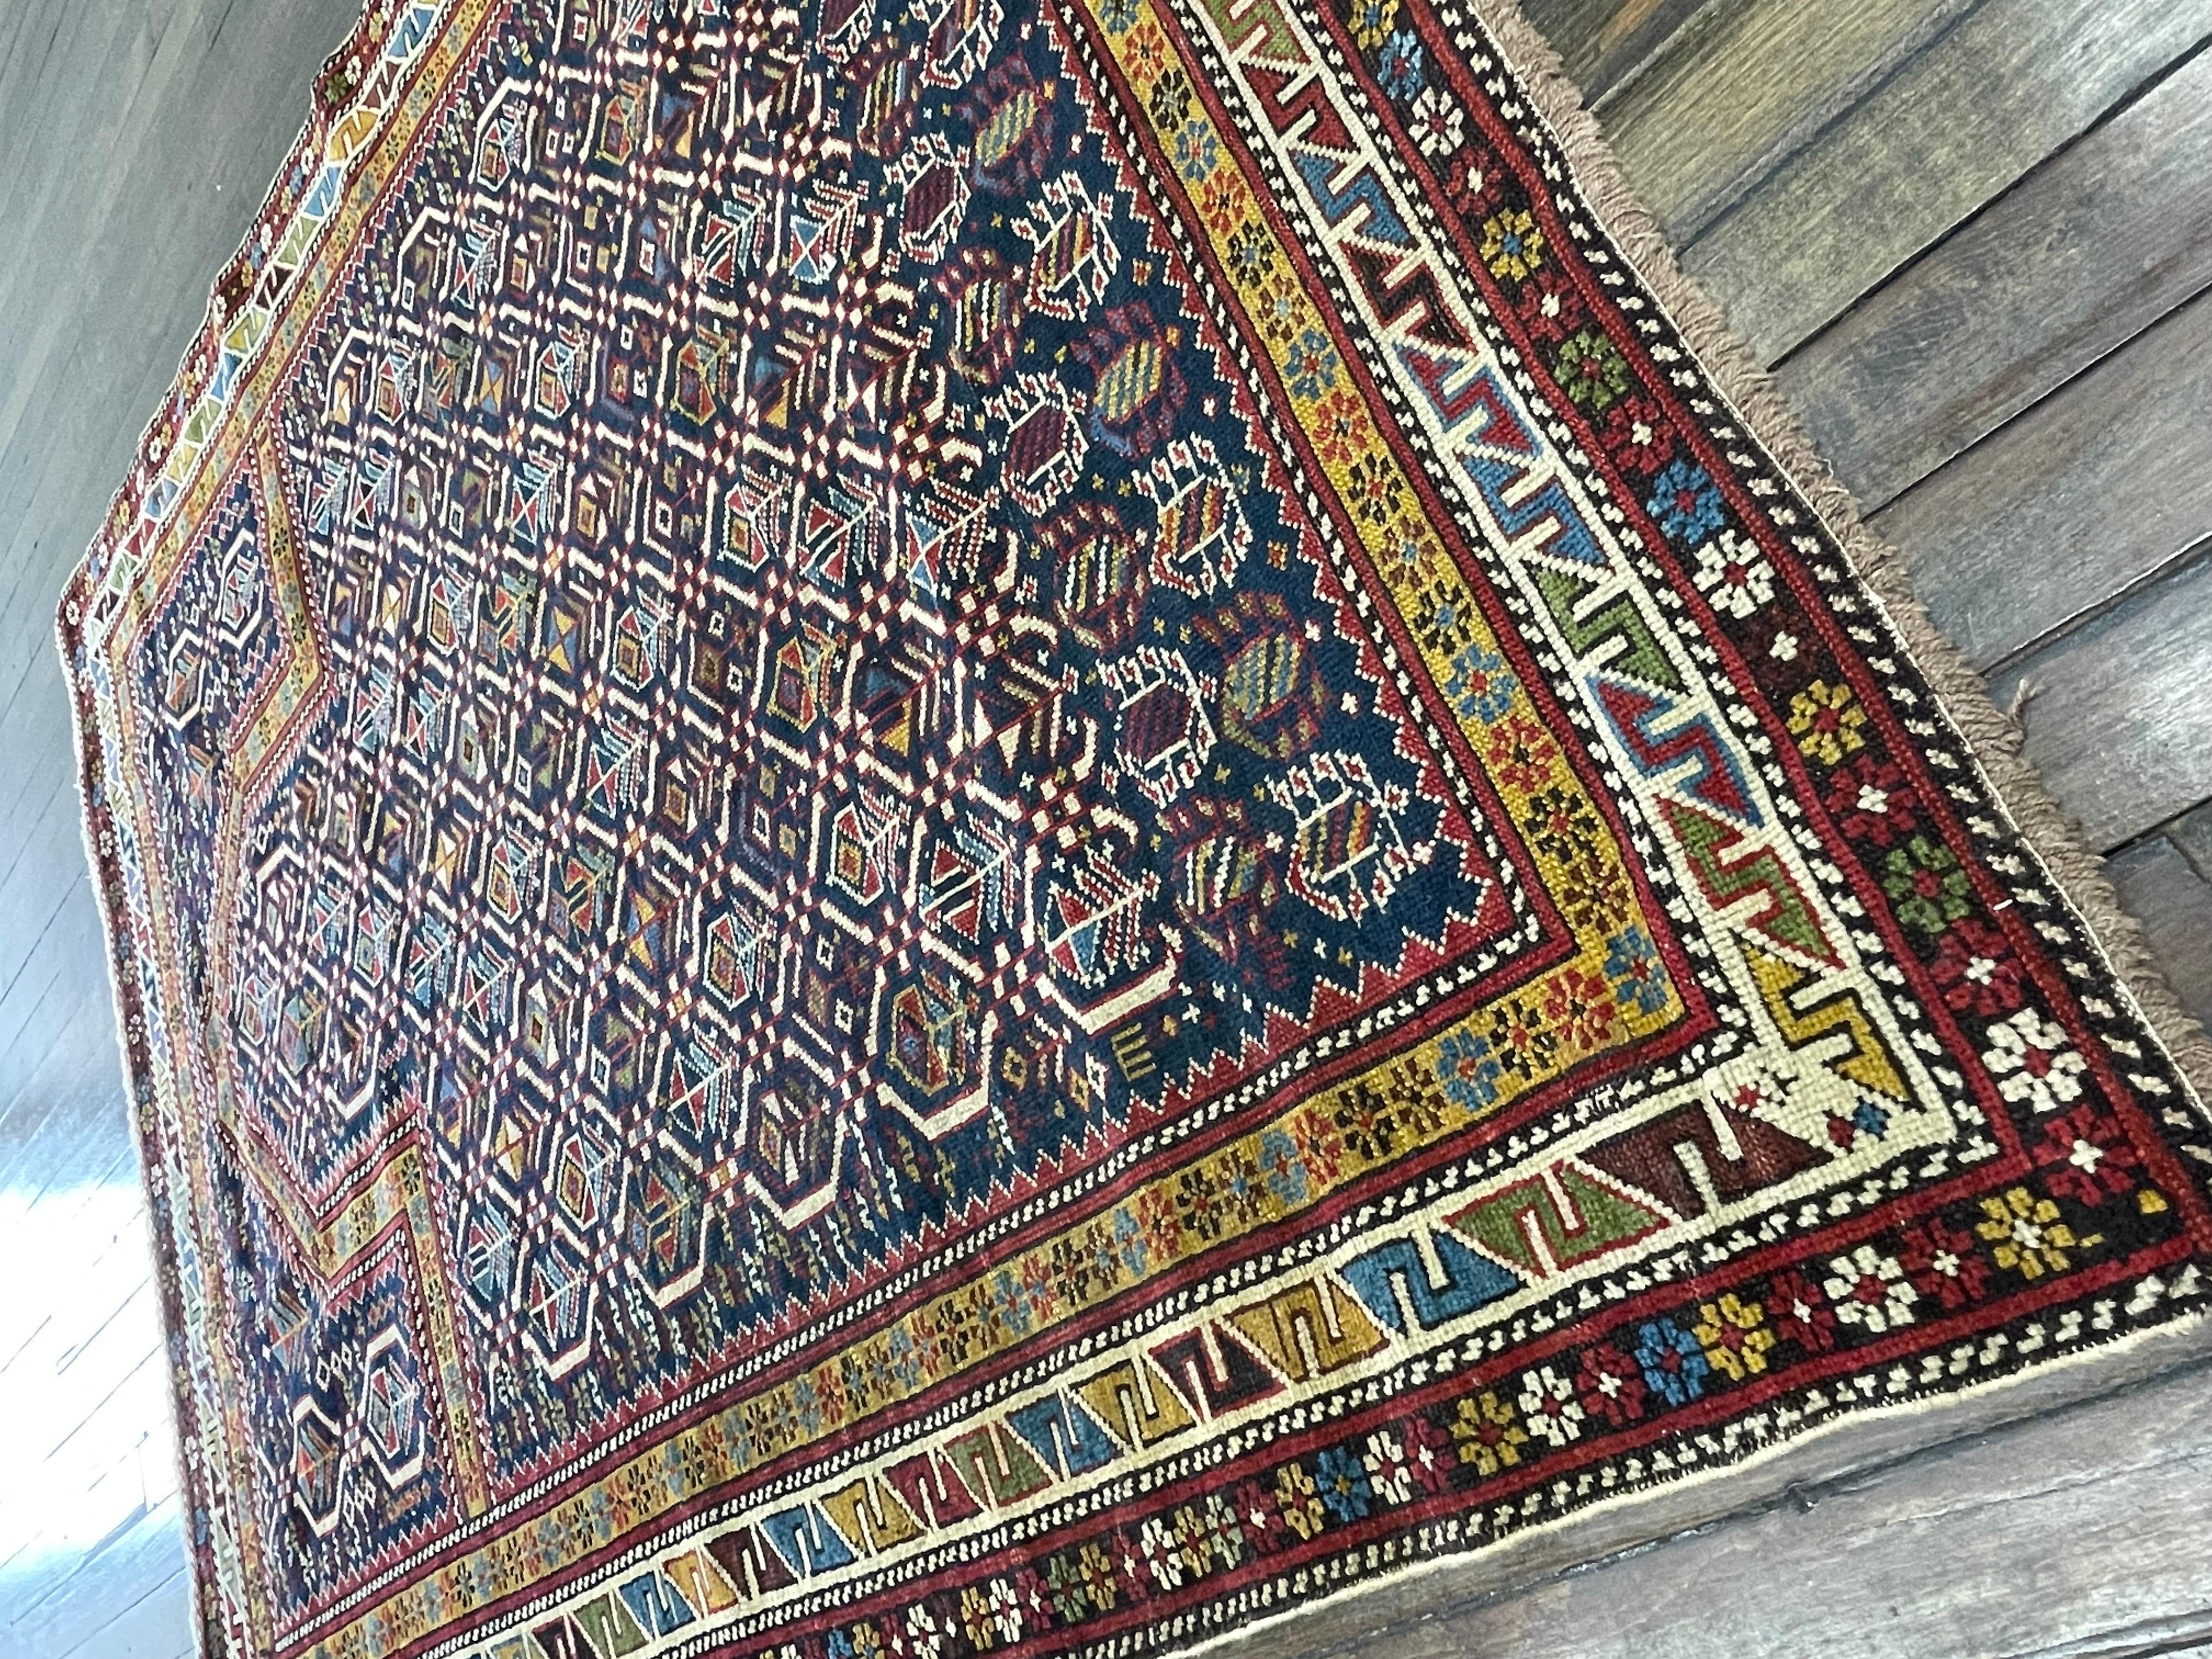 This amazing caucasion rug,known as Marsali was handwoven in the Shirvan region of the Caucasus mountains.The rich indigo blue(indigo is a tropical plant in pea family) field with brilliant red,yellow and light blue border light brown guard framing